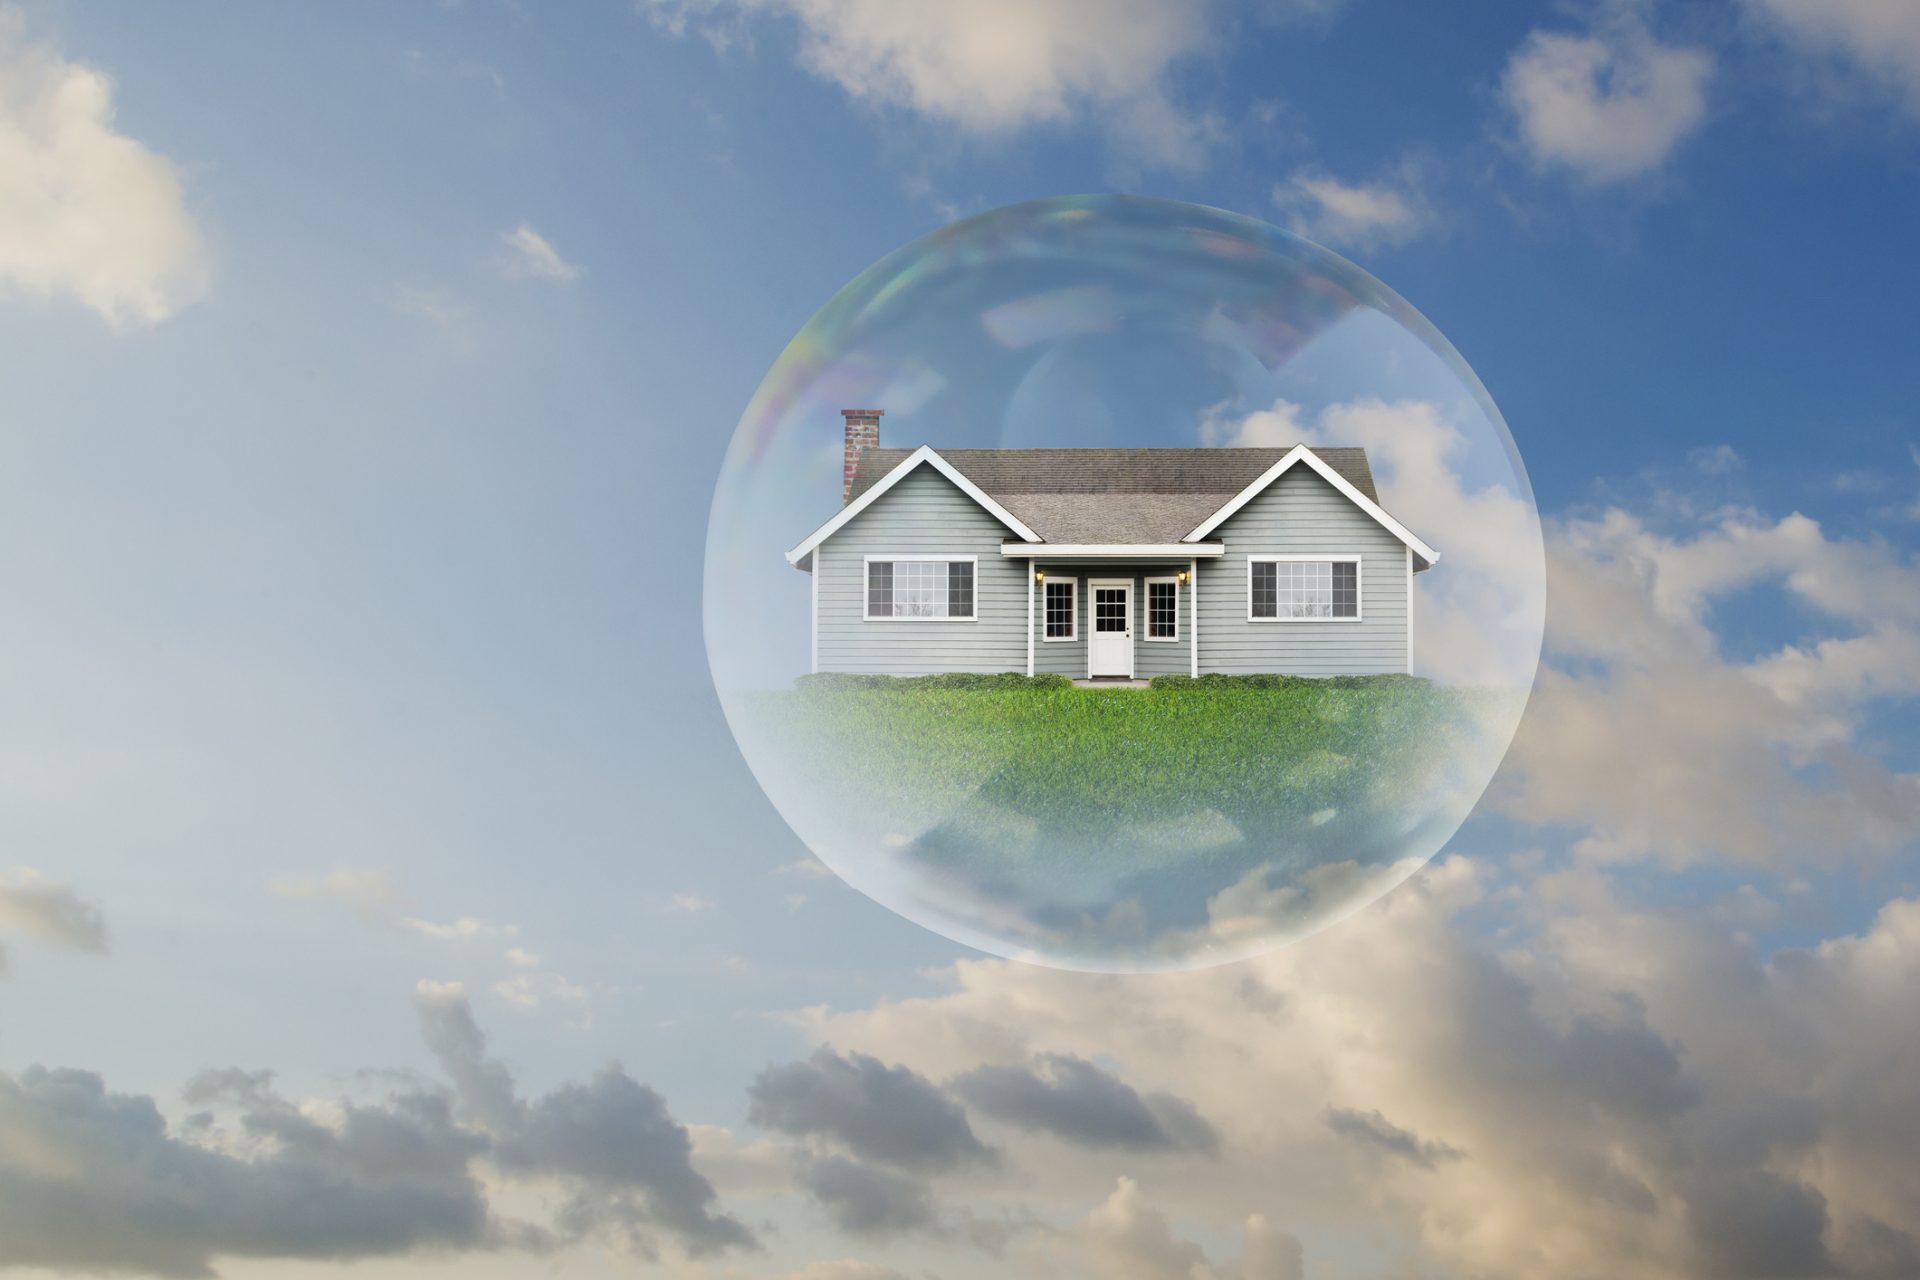 Canada might be facing biggest housing bubble ever expert says